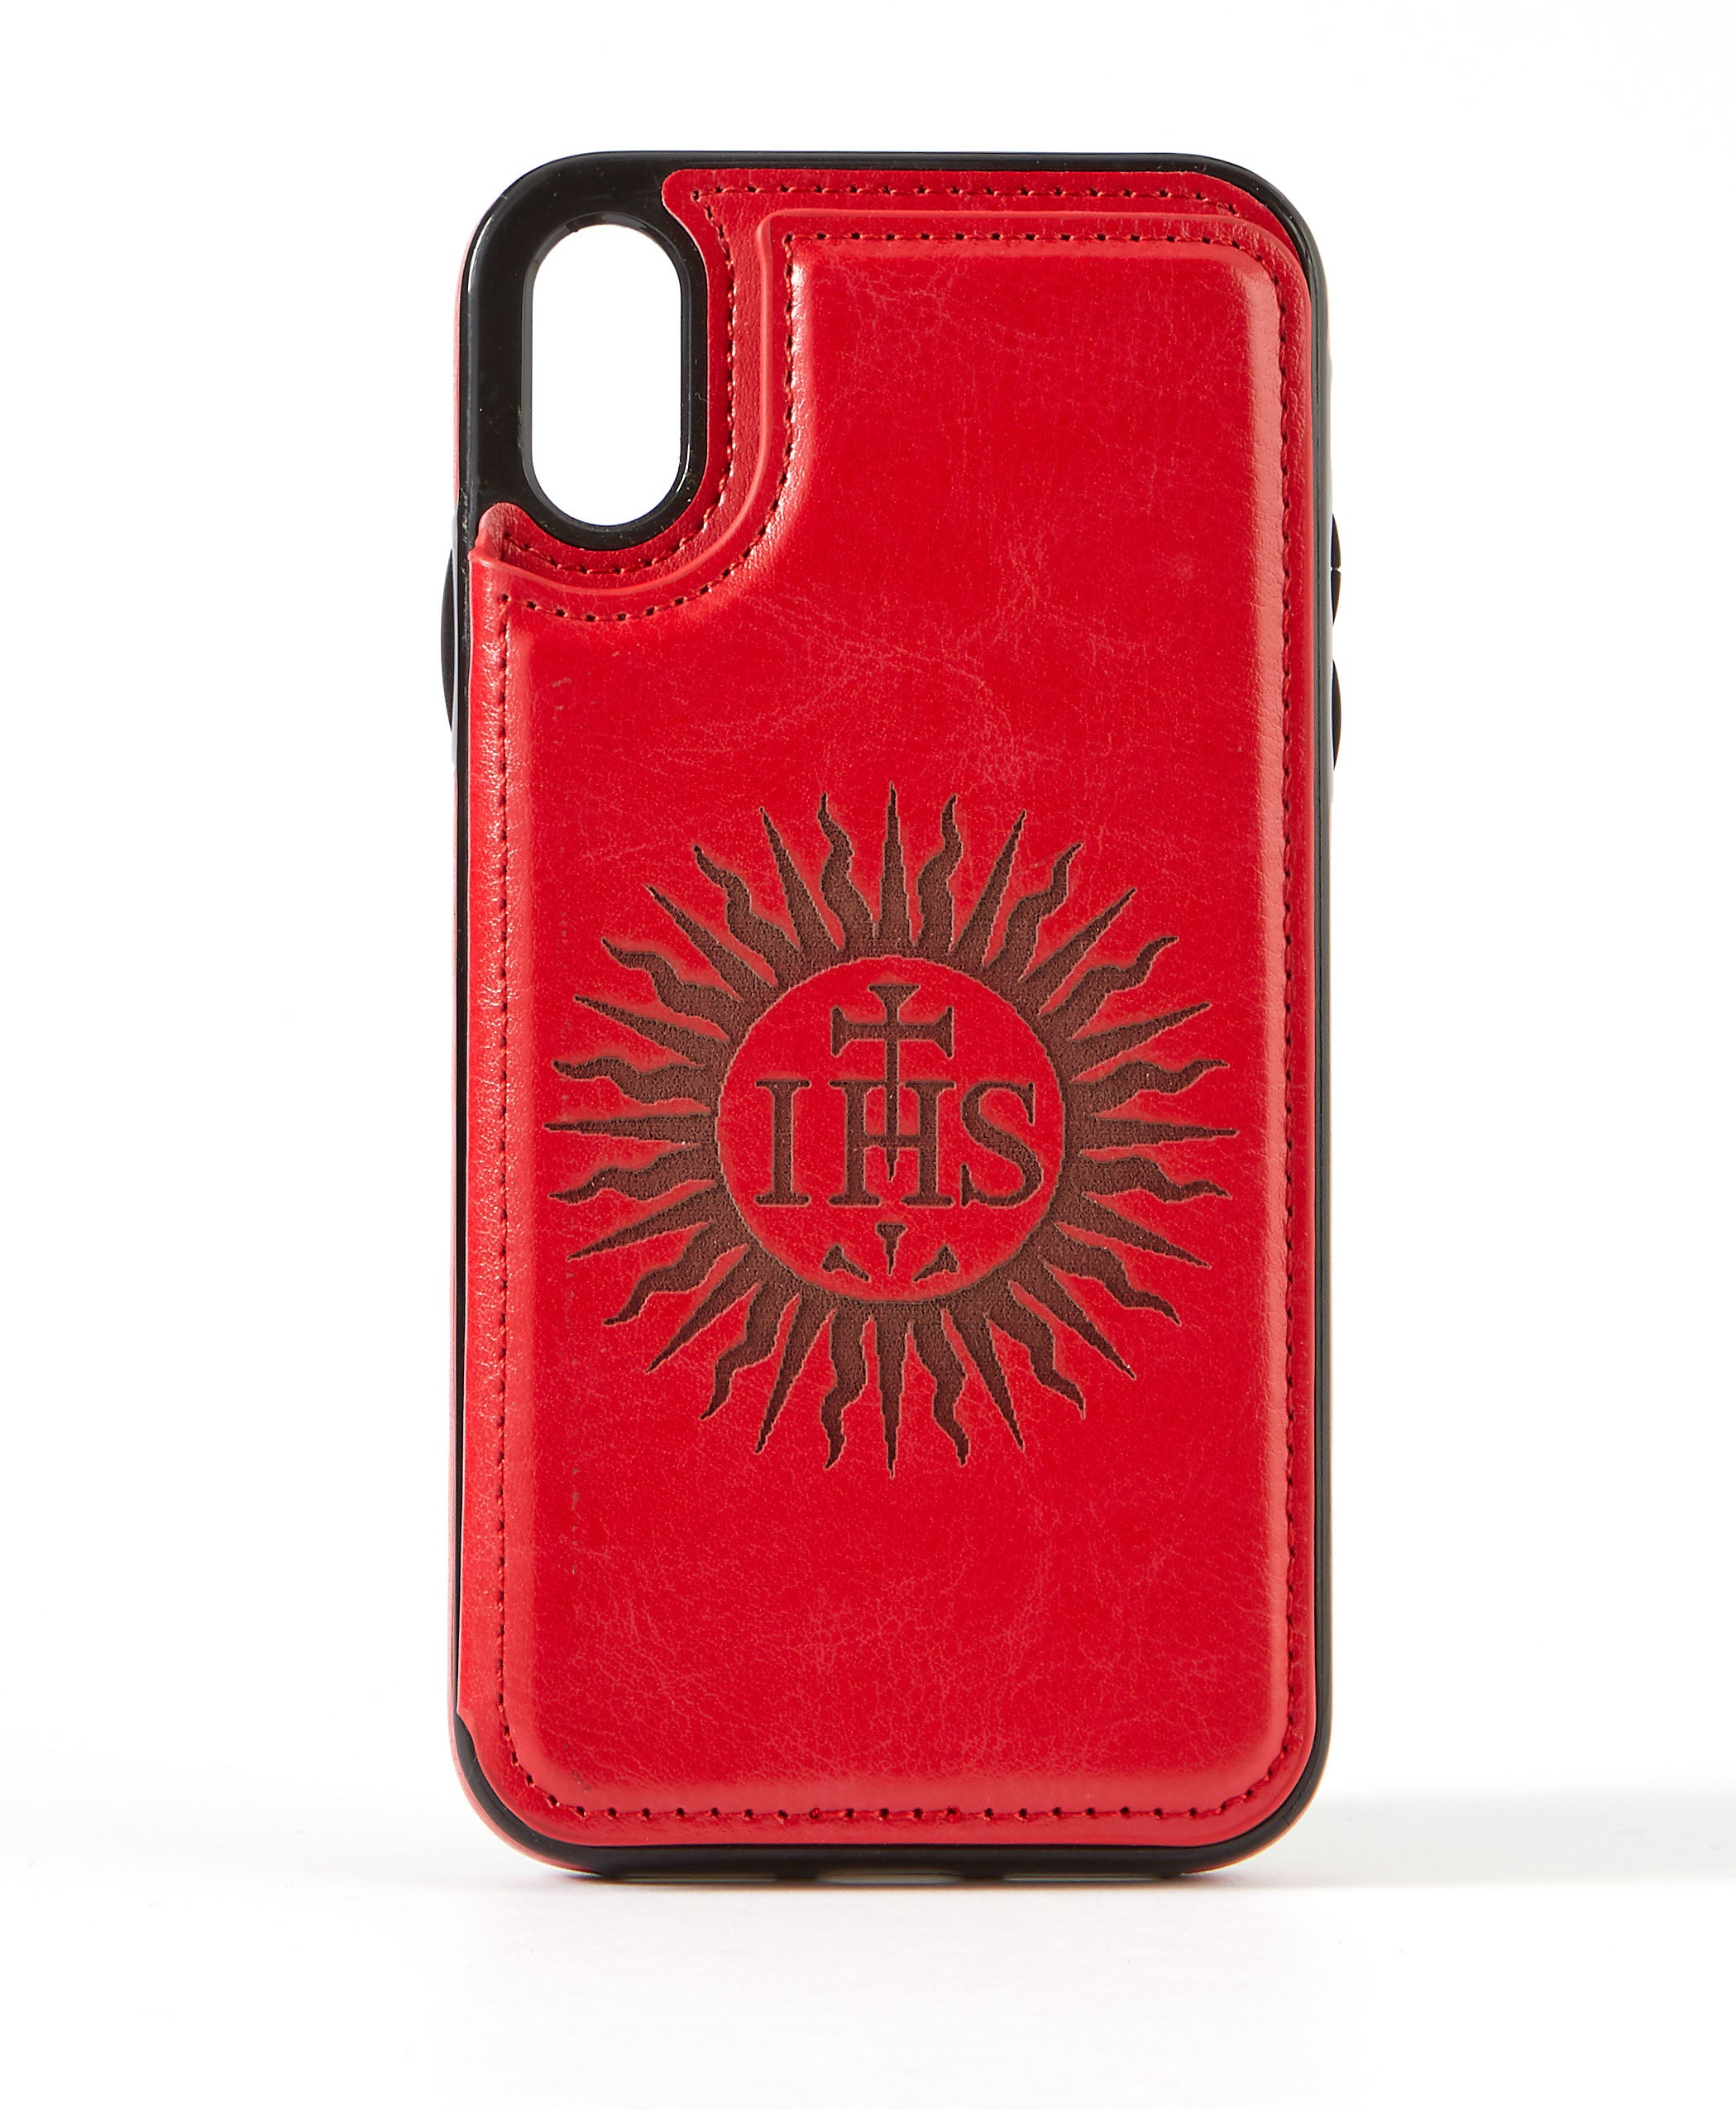 Sunburst Red Leather Wallet Case for iPhone XR